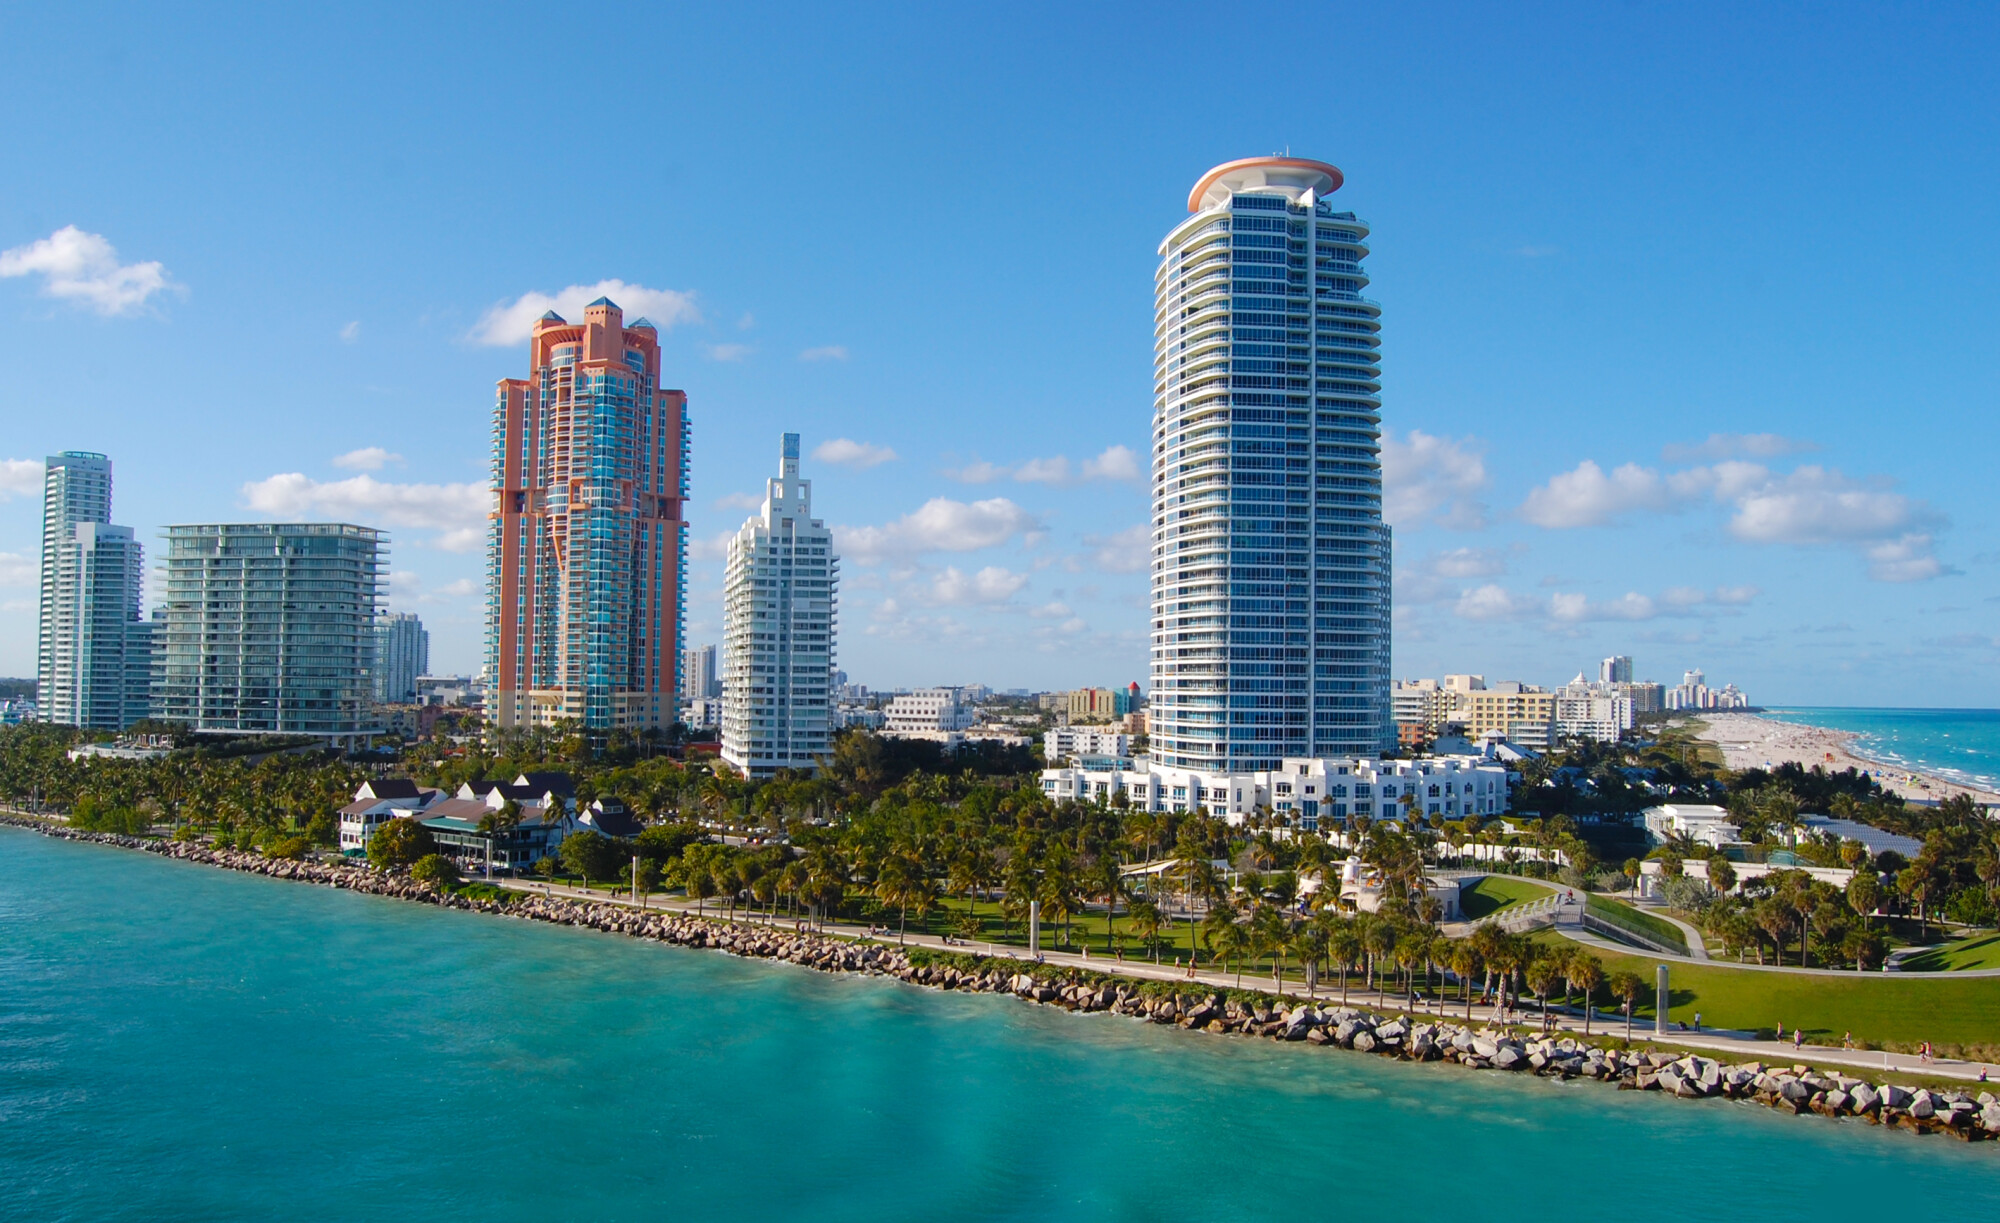 Are condos in Miami a good option for rental investors, and what areas are best? Read this guide to learn about the market and discover the top neighborhoods.